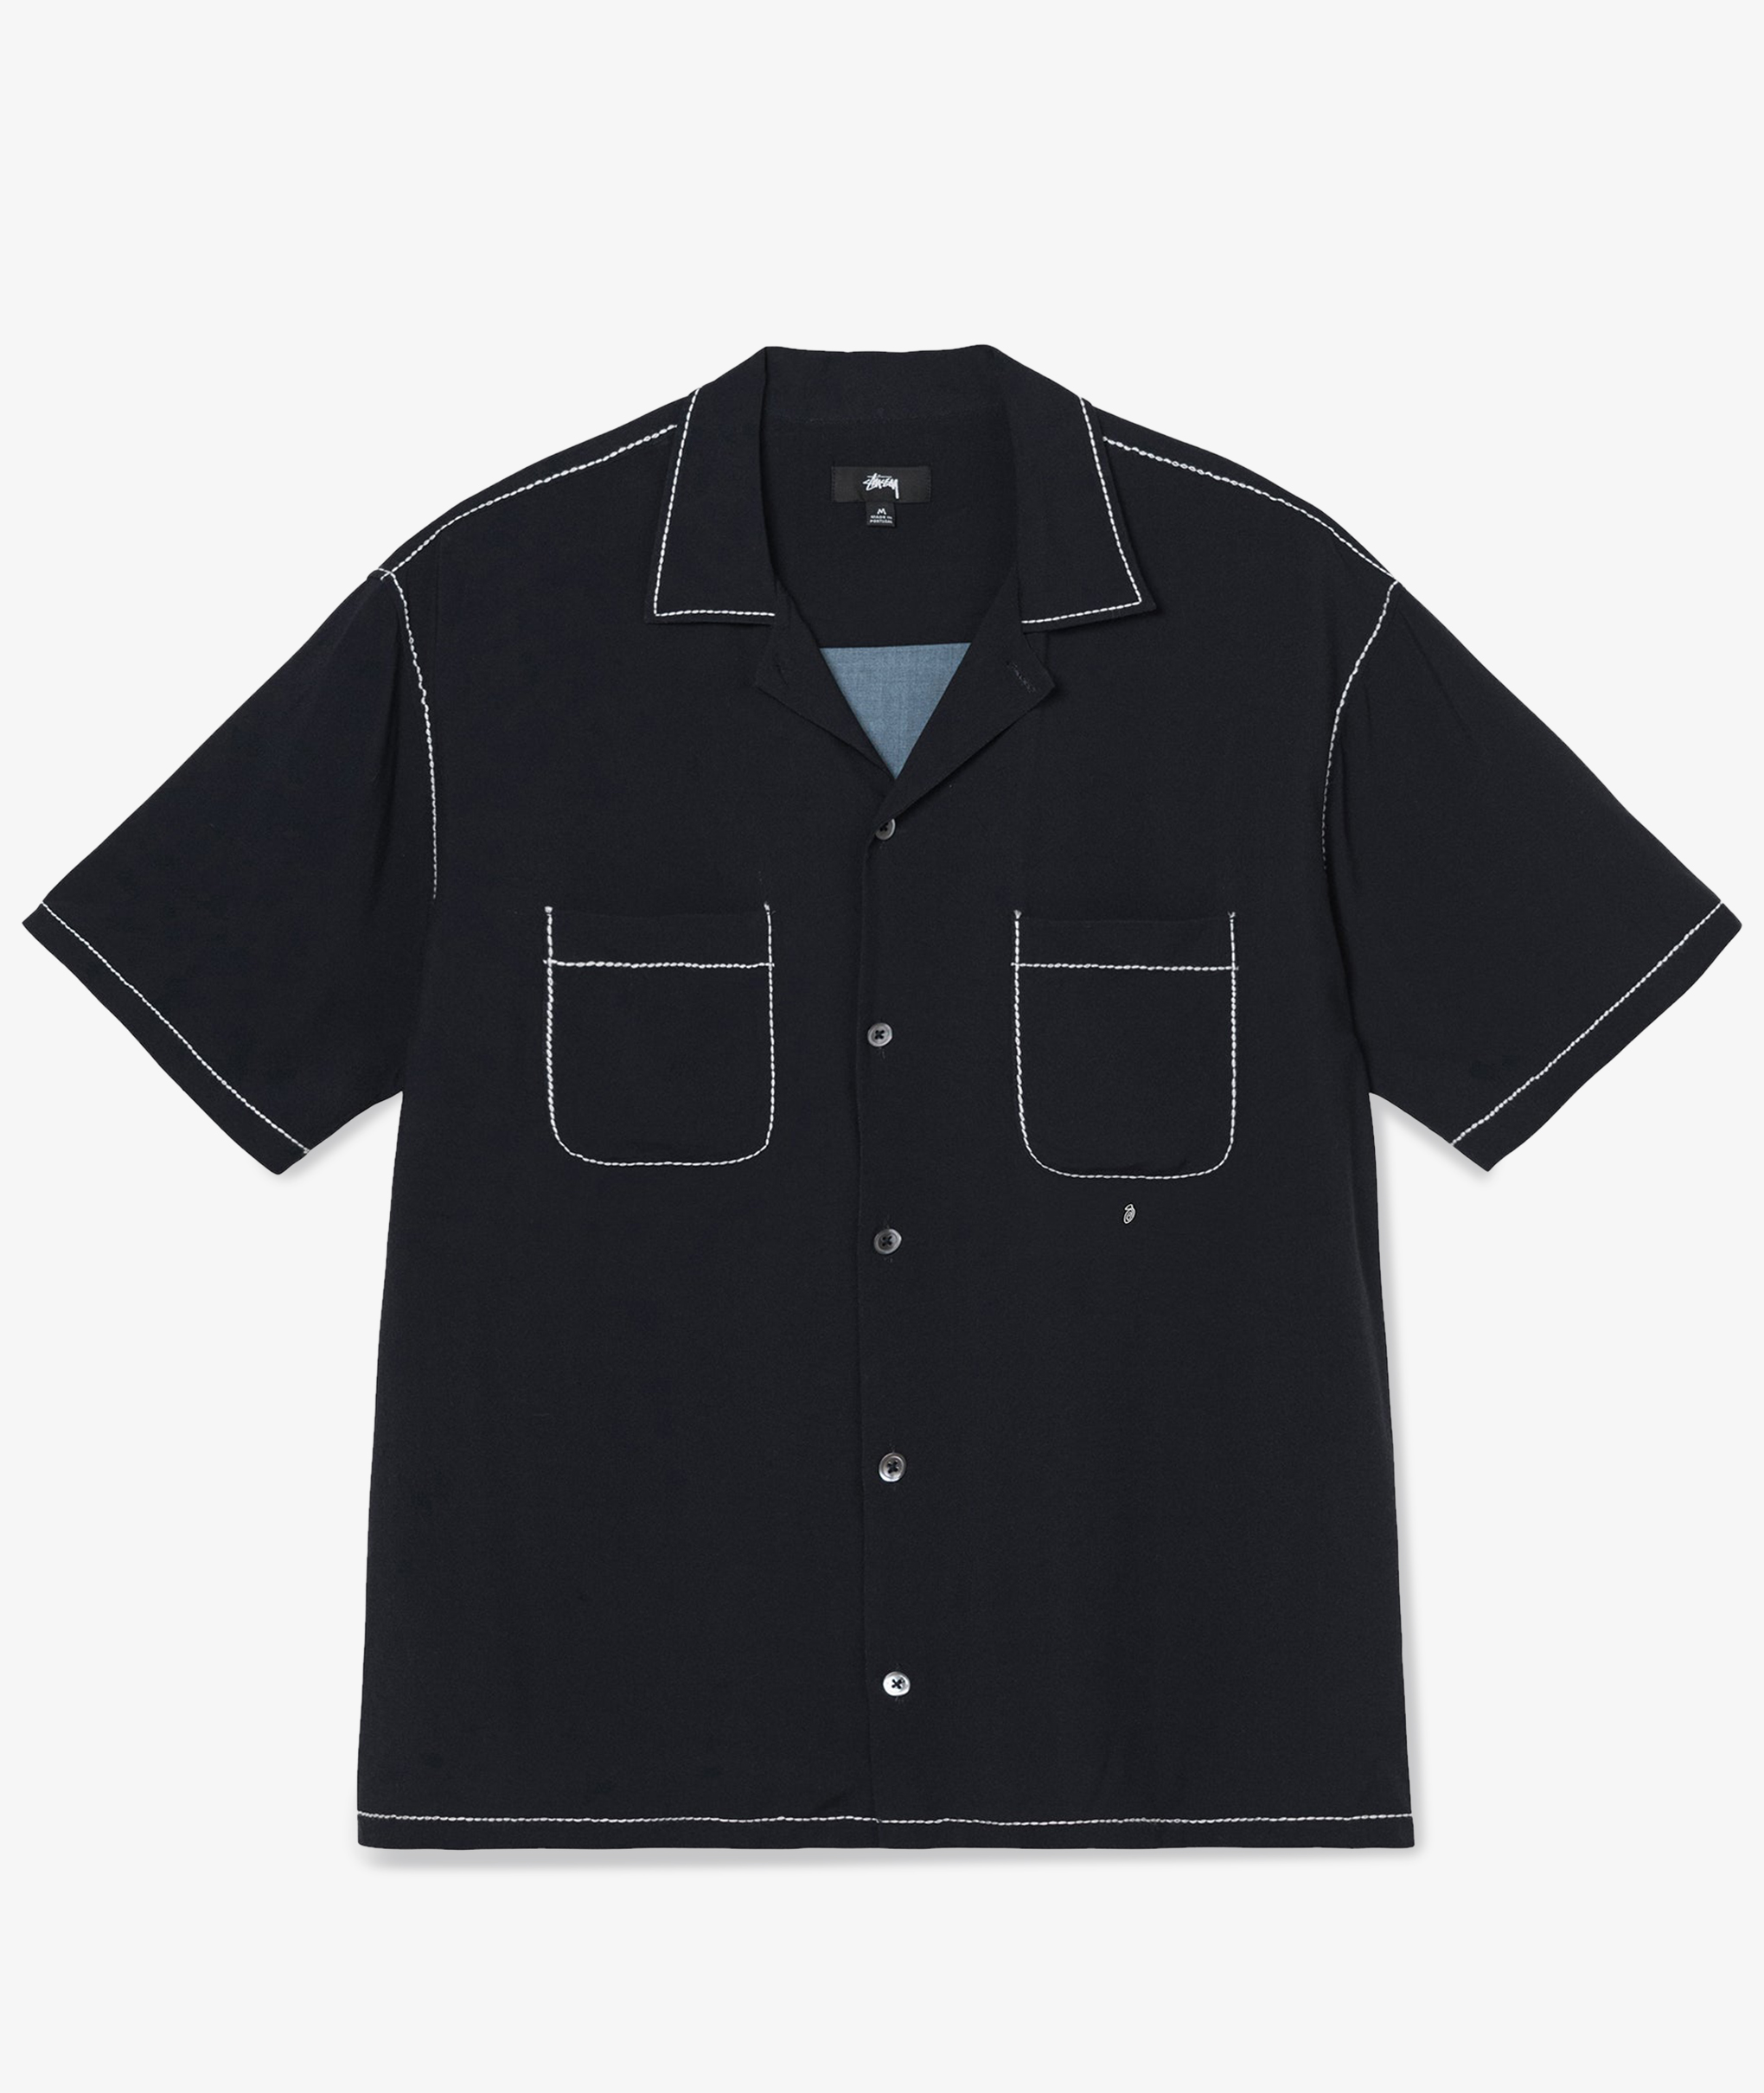 Norse Store | Shipping Worldwide - Stüssy Contrast Pick Stitched Shirt ...